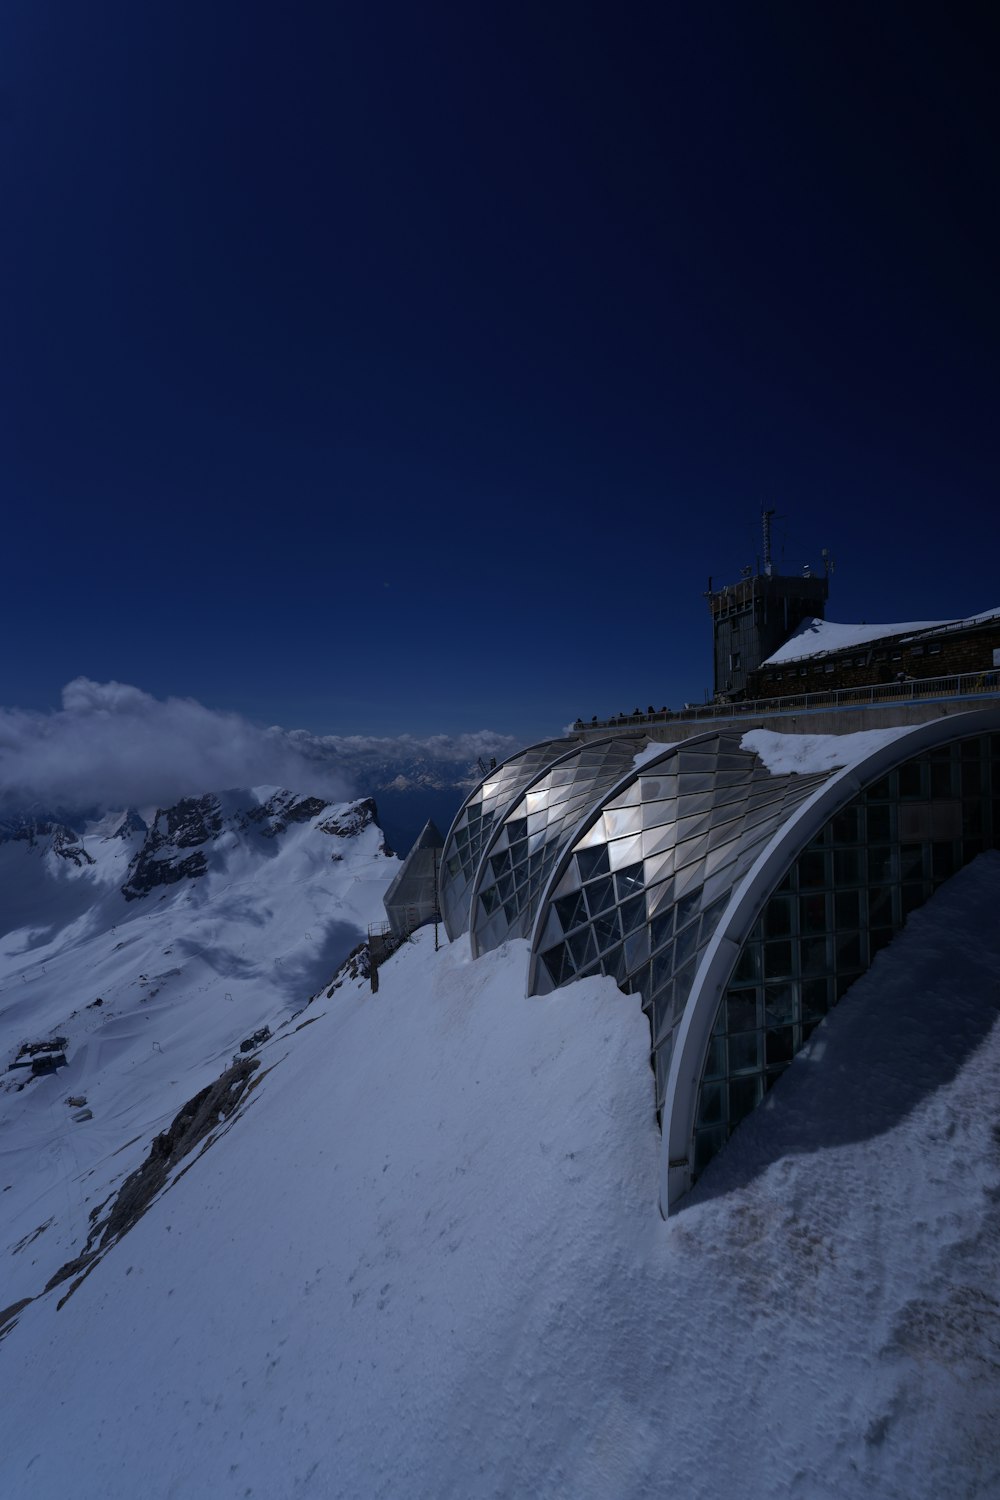 a building with a glass wall and a bridge over a snowy mountain